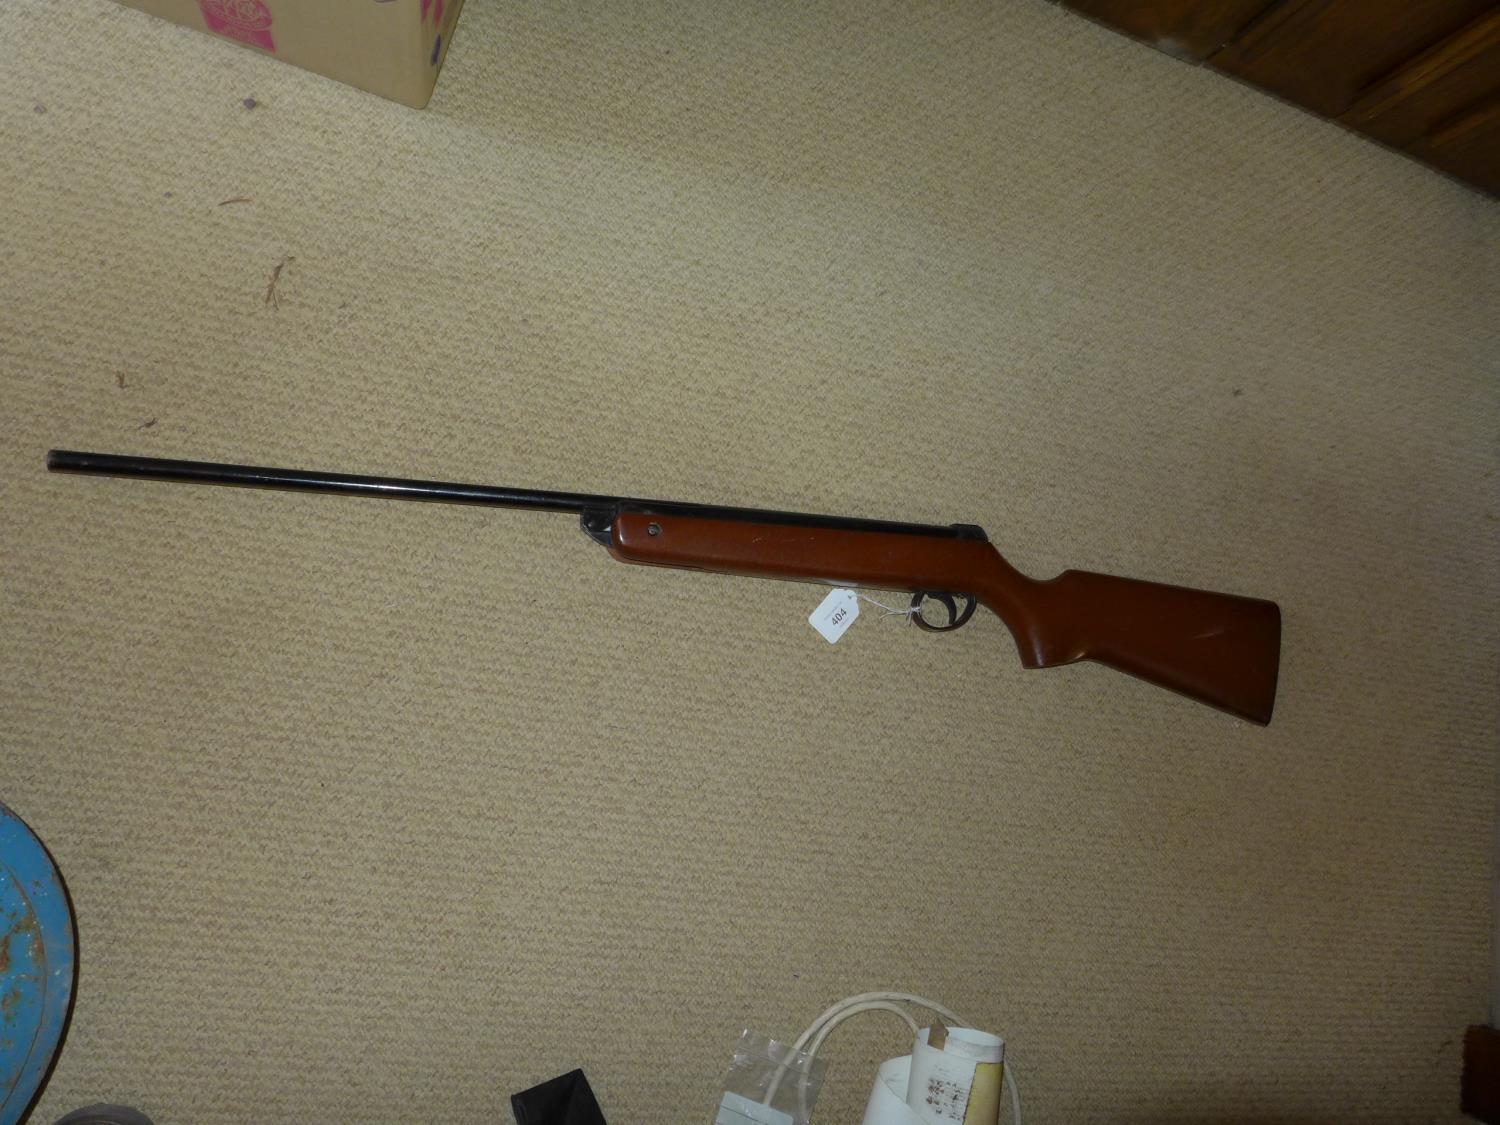 A B.S.A. METEOR .22 CALIBRE AIR RIFLE, 47CM BARREL, SERIAL NUMBER TH27453 WORKING WHEN CATALOGUED